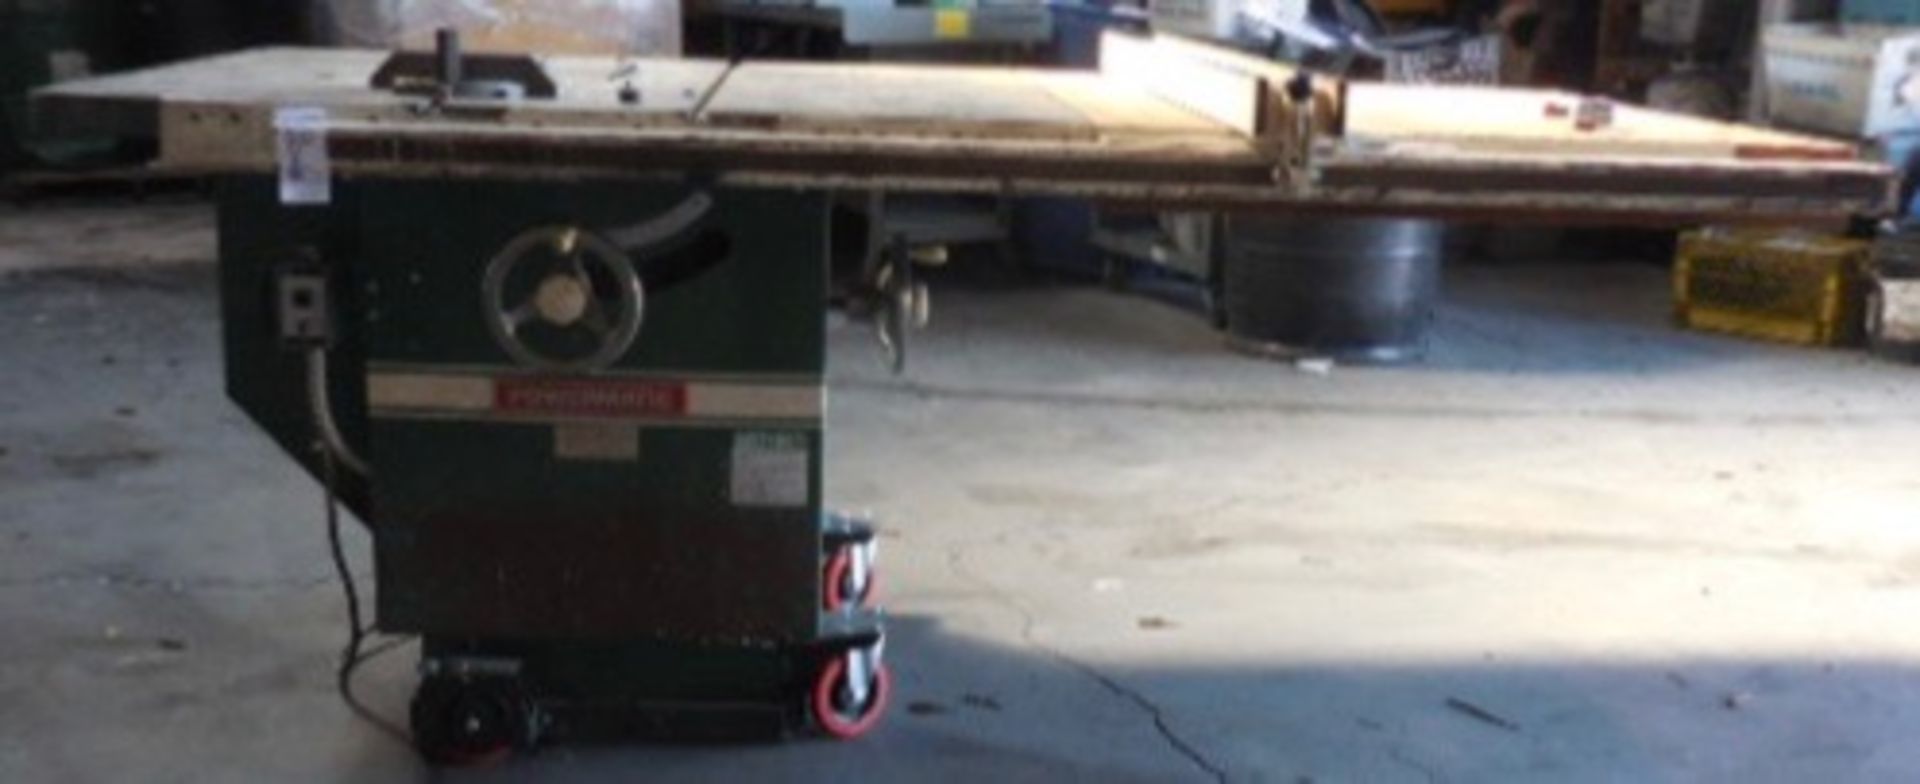 48' POWERMATTIC TABLE SAW WITH 36" EXTENSION, WITH RIPPING FENCE MODEL 68 ON ROLLING CART